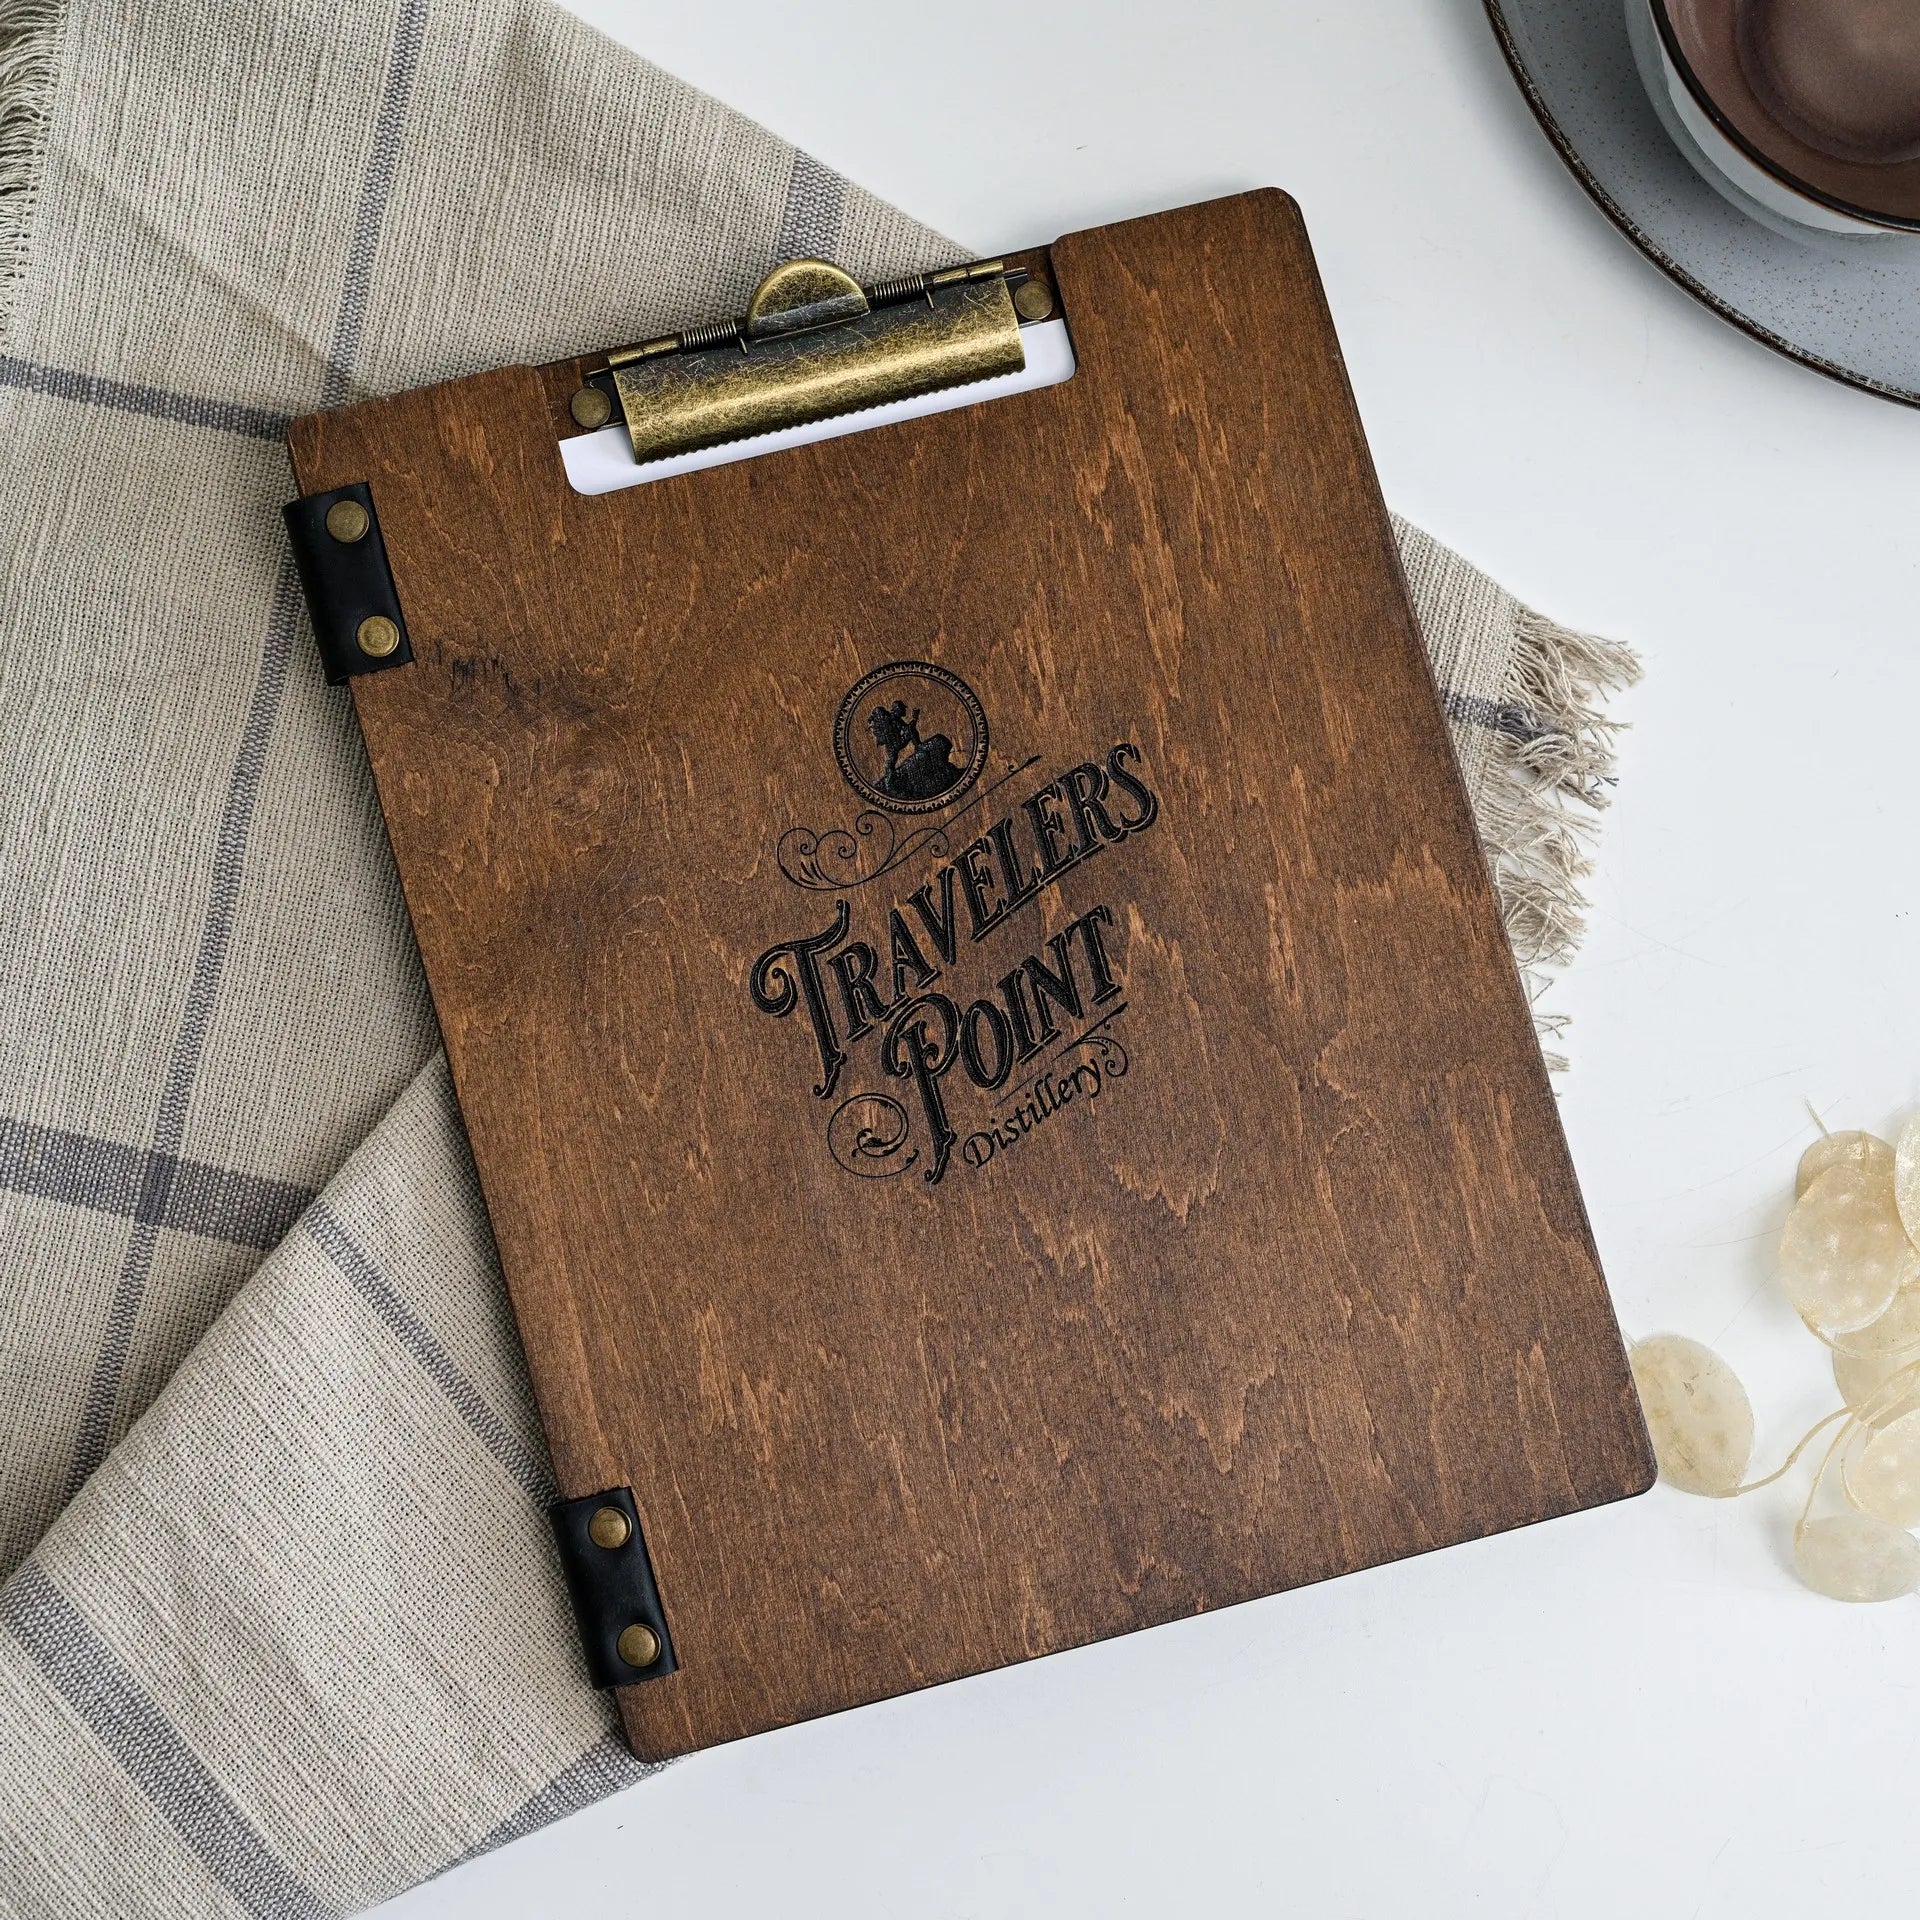 Our hardcover menu binder allows for seamless sheet changes, ensuring your menu is always up-to-date.